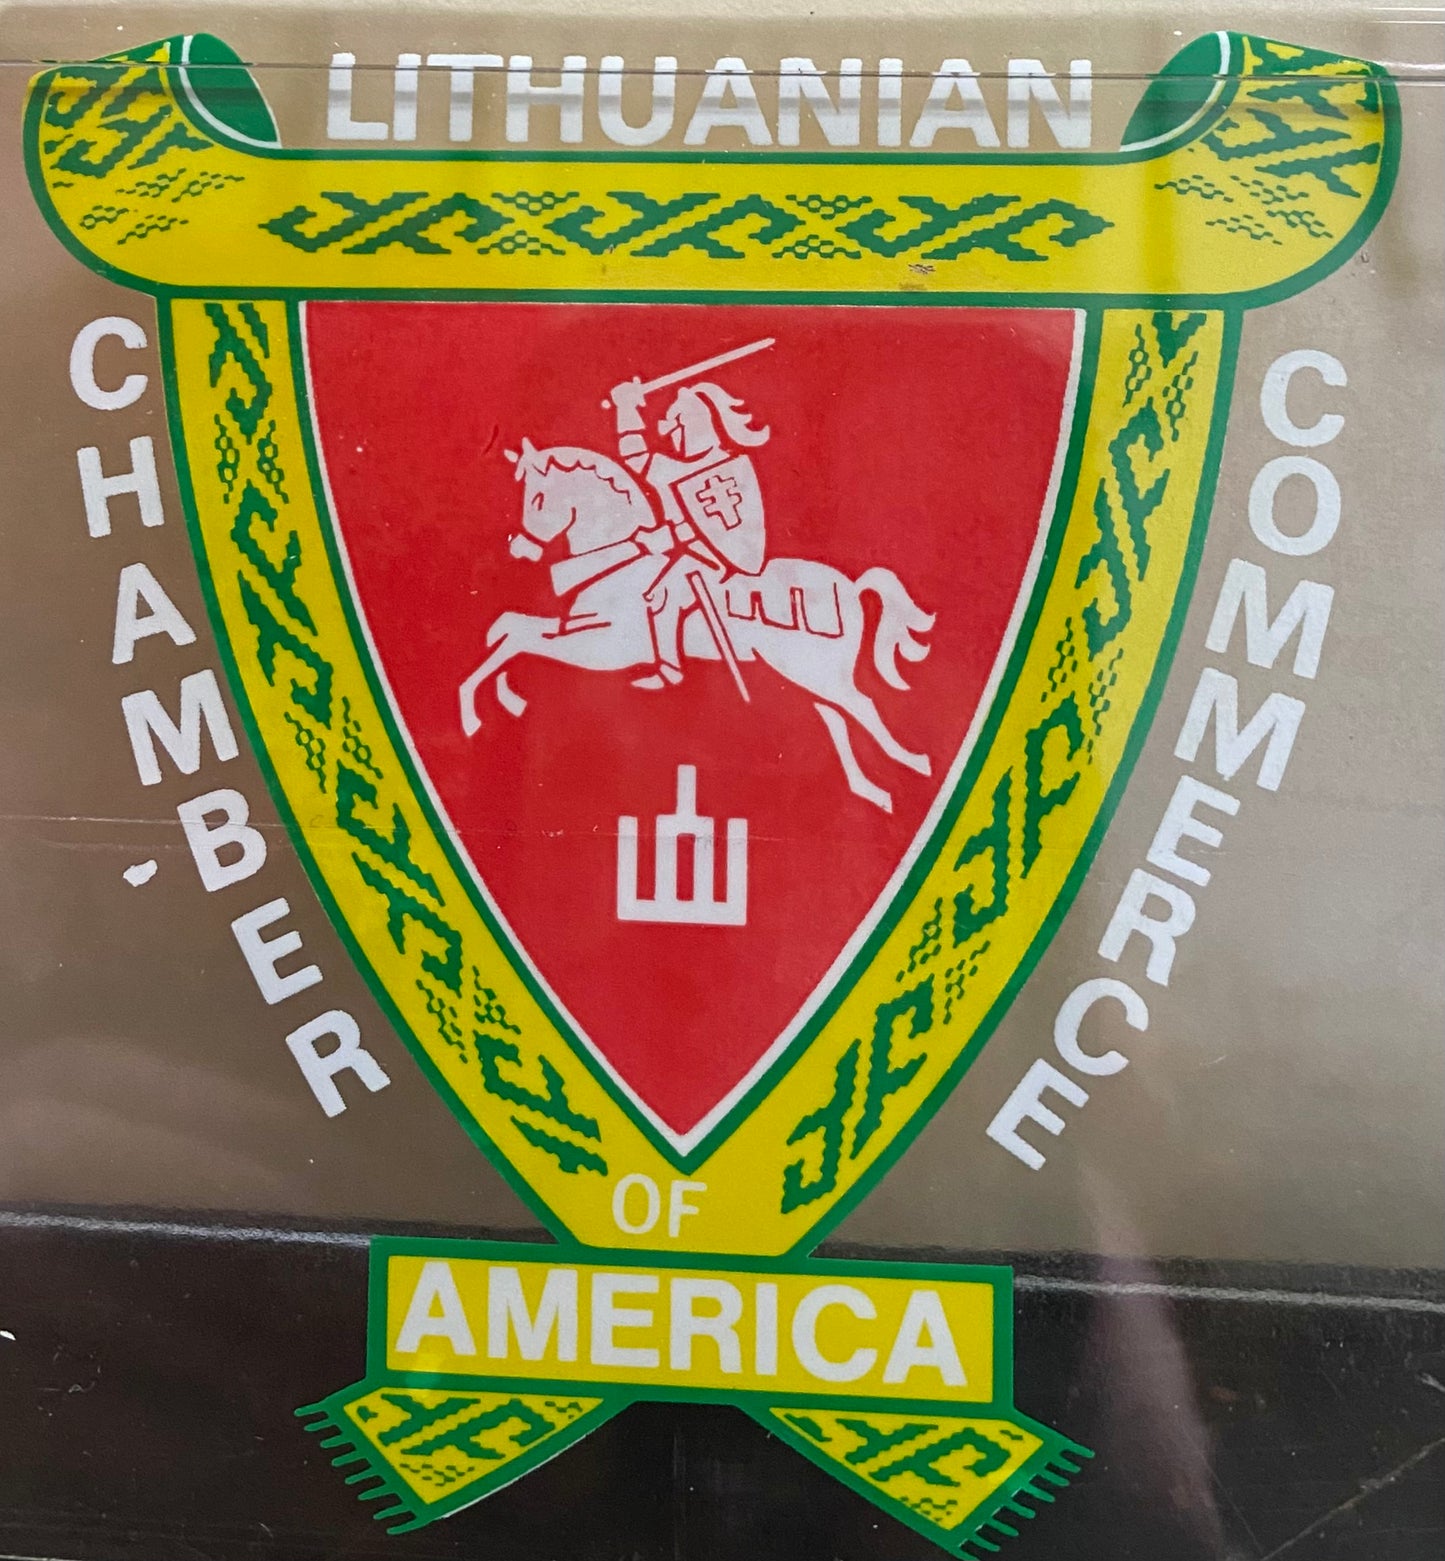 Lithuanian Chamber of Commerce of America Decal (1282)